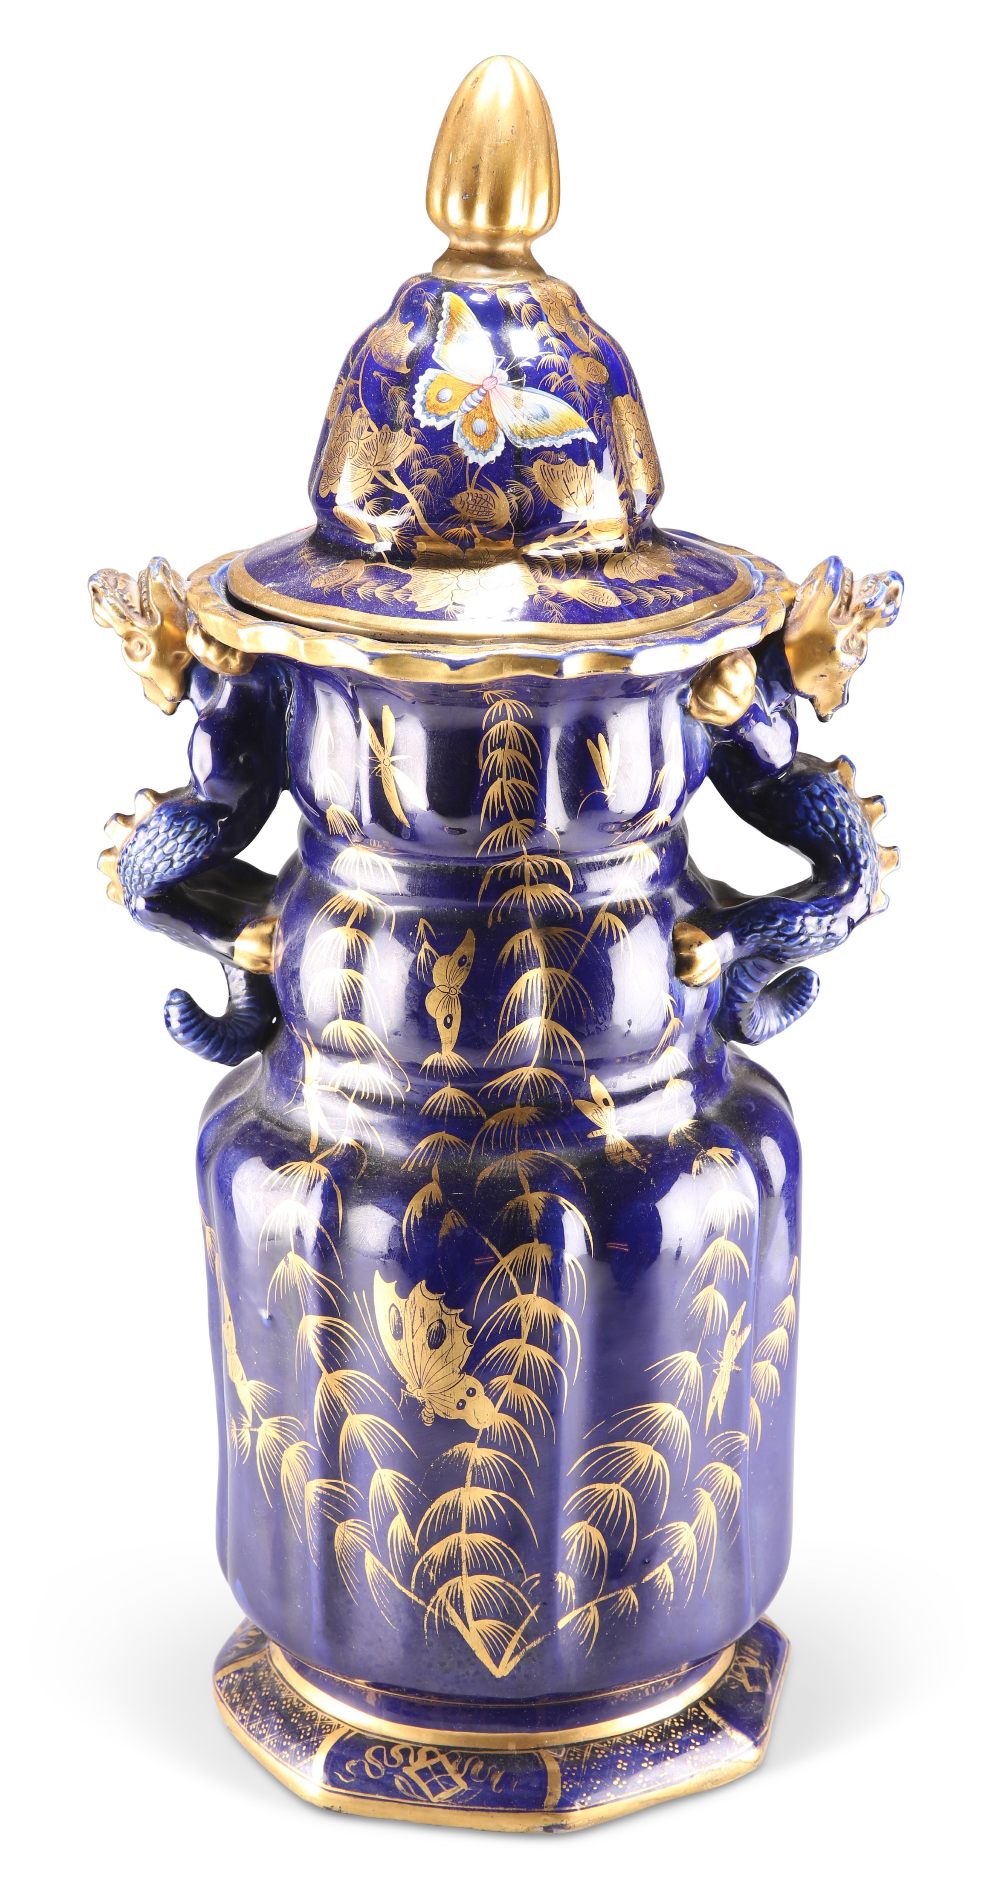 A LARGE ENGLISH IRONSTONE VASE AND COVER, CIRCA 1820